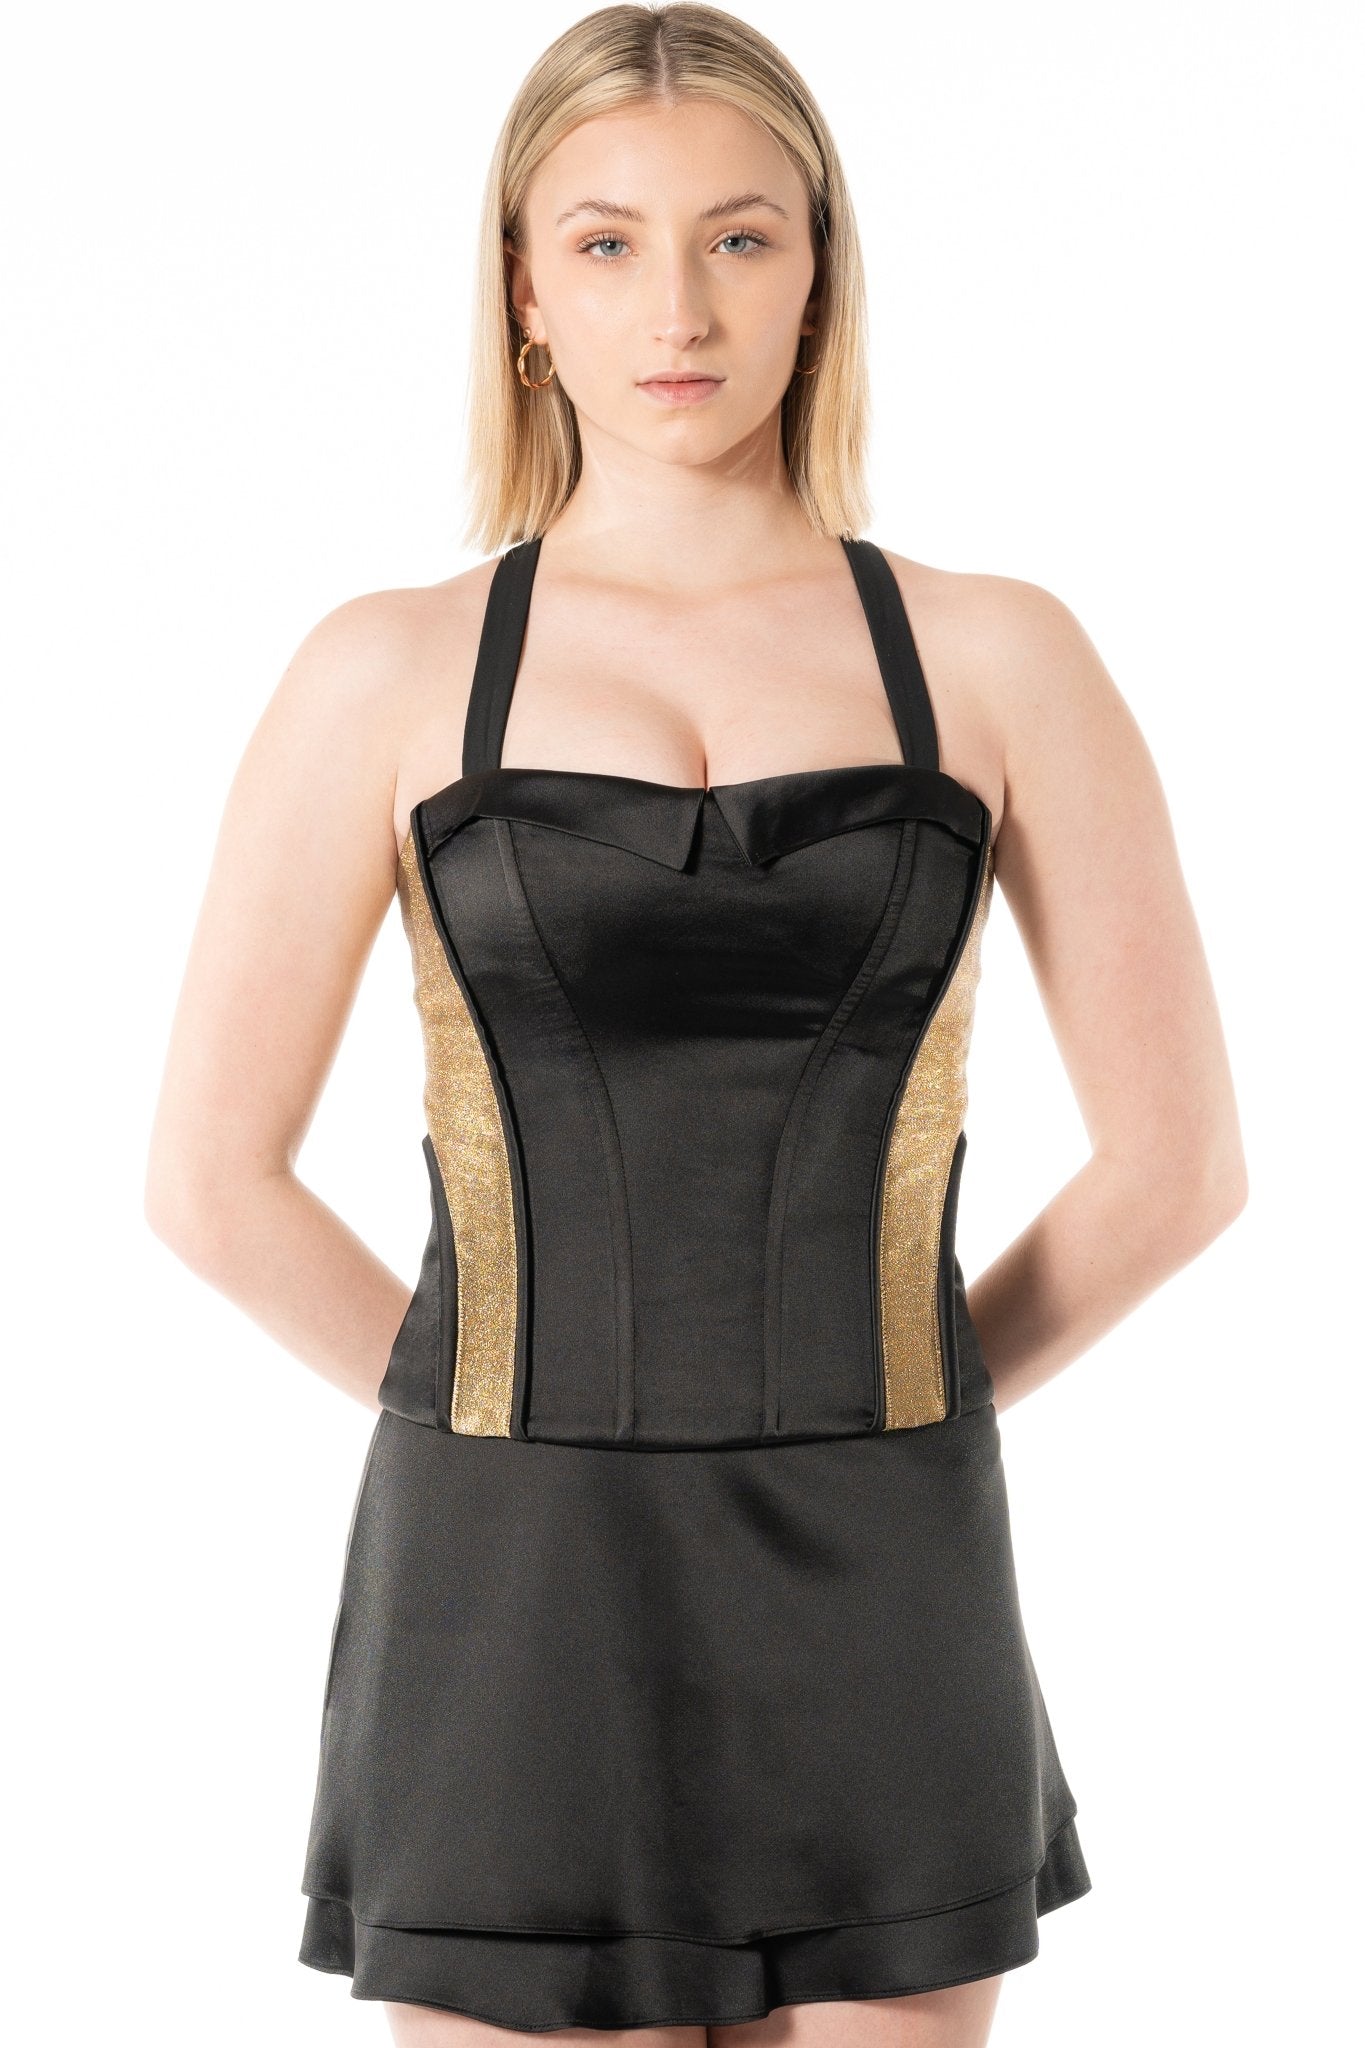 LILA Bustier Uniform Corset Top for casino, gaming, hotel, restaurants, hospitality, and resorts. Black satin with gold brocade sides with adjustable straps corset uniform. - KAPTVA Apparel